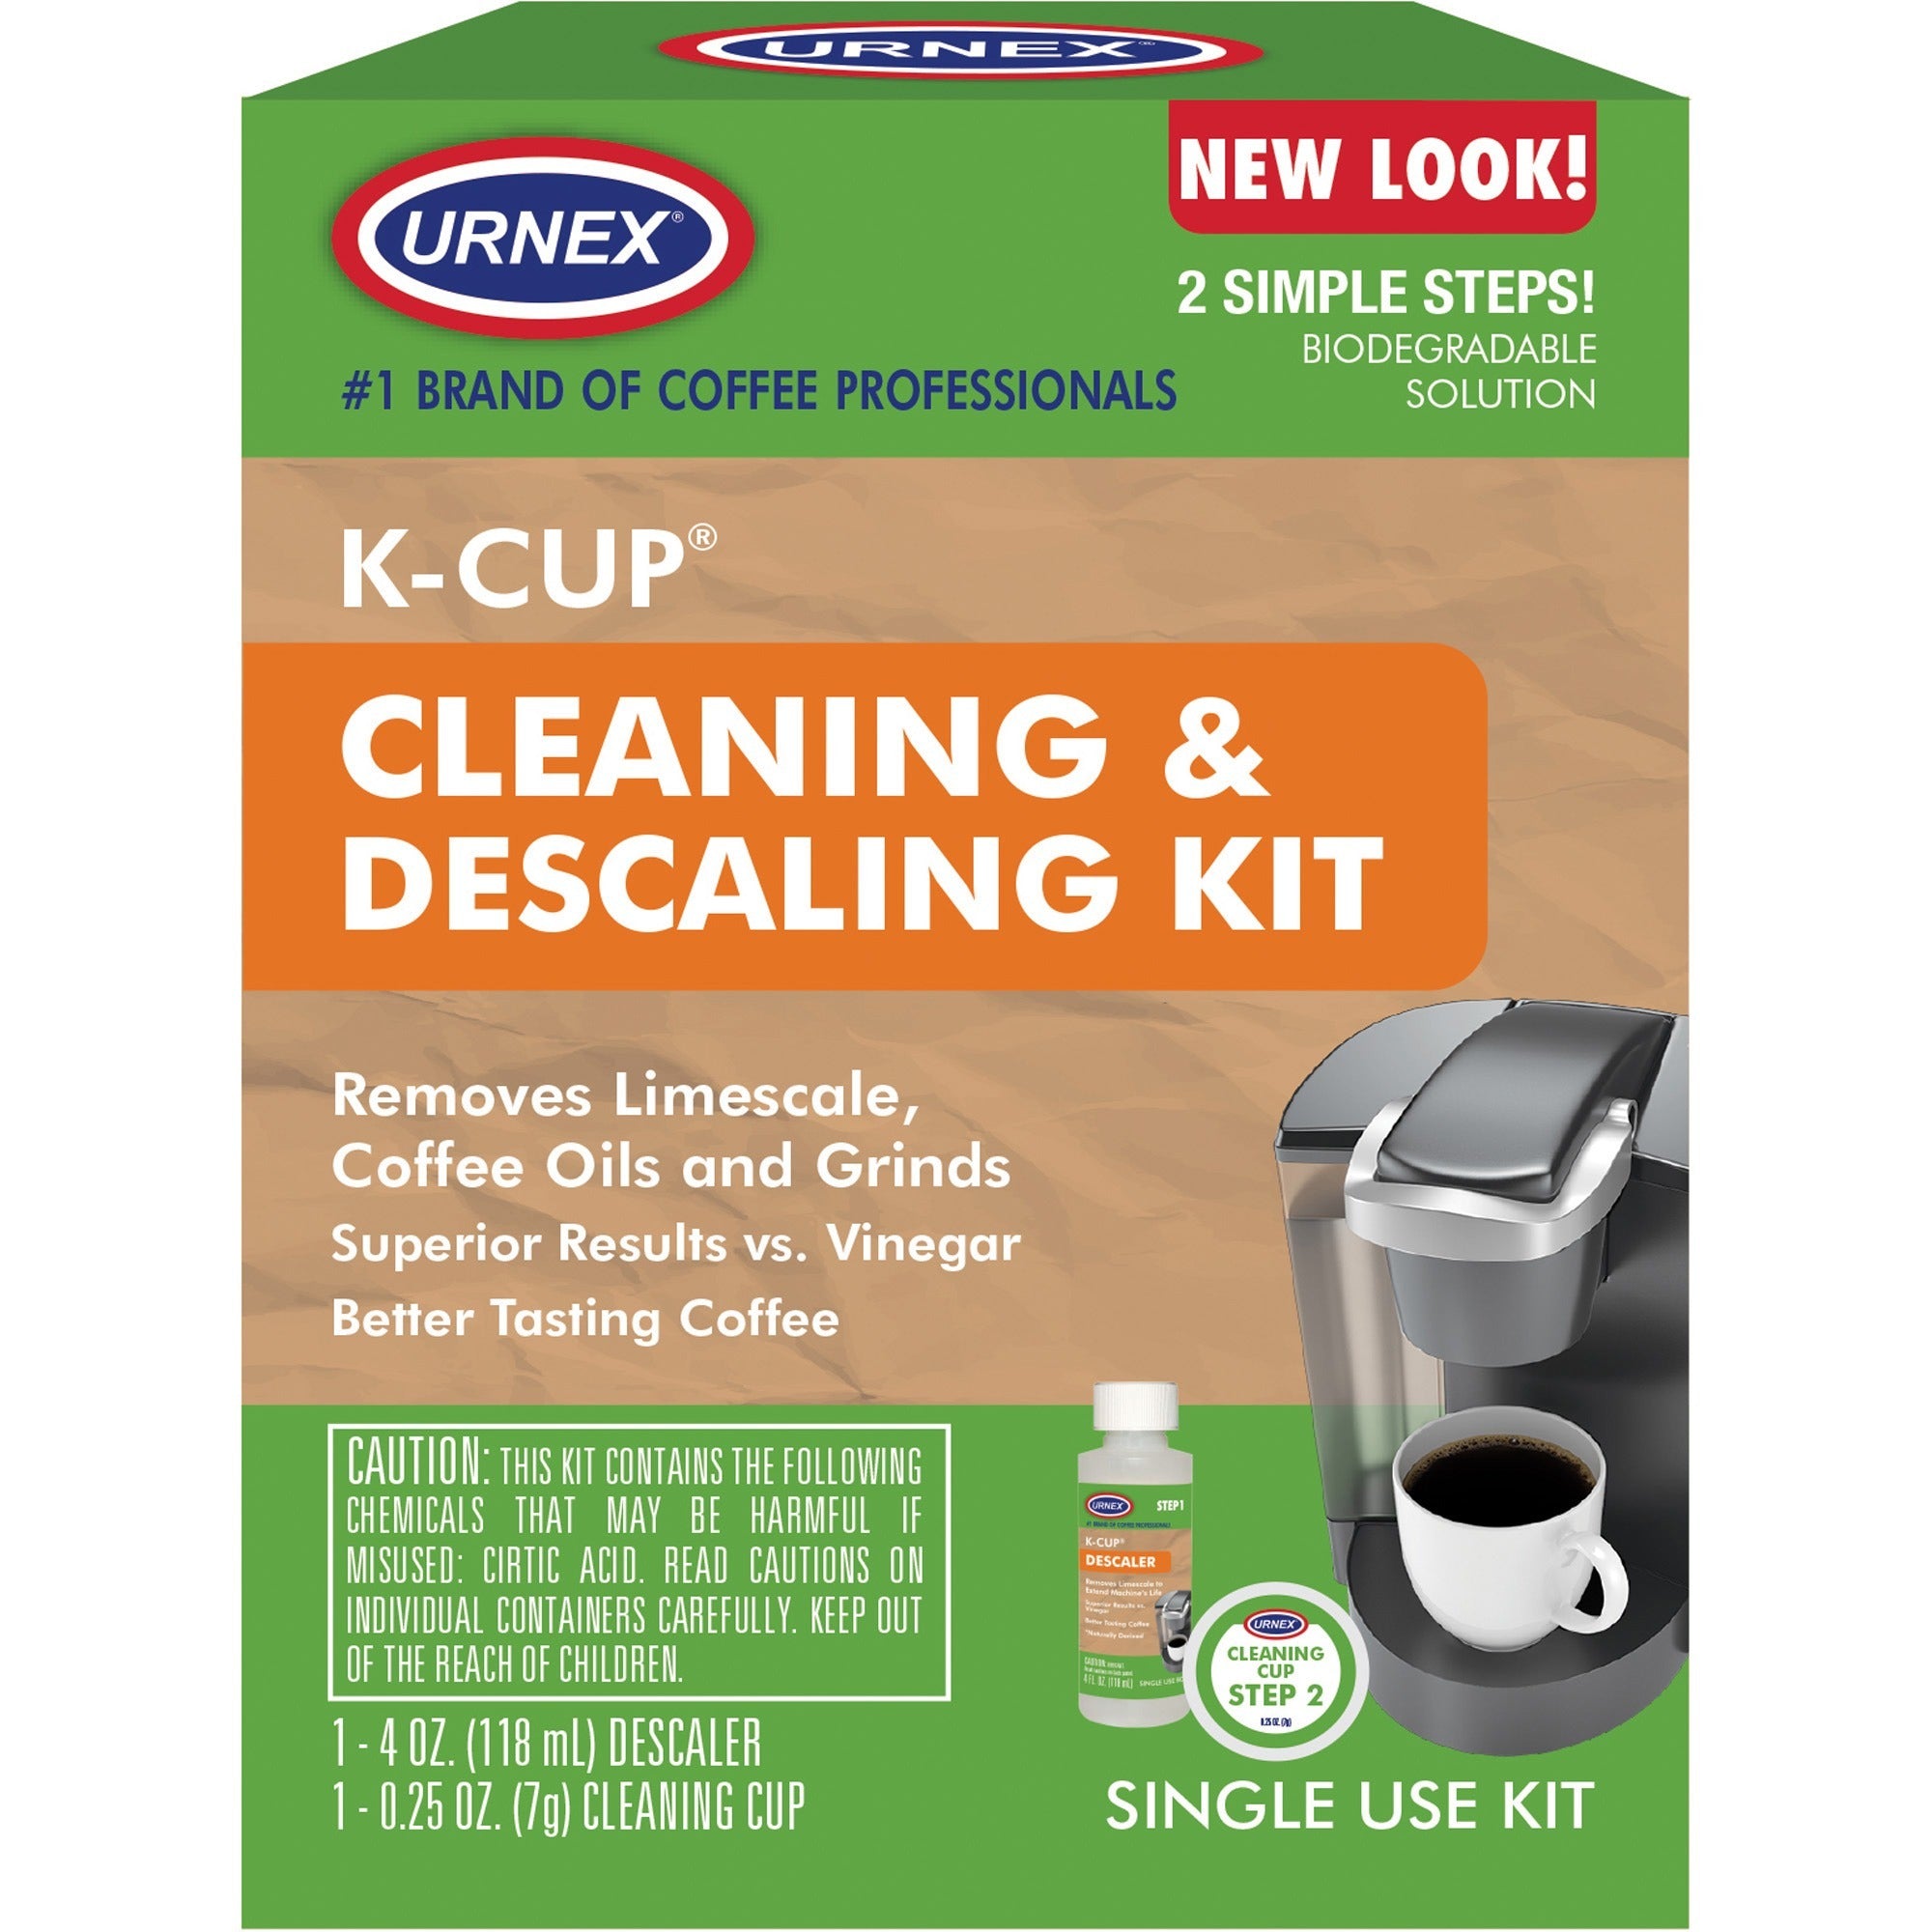 urnex-single-brewer-cleaning-kit-for-coffee-maker-025-oz-biodegradable-phosphate-free-odorless-1-each-green_wmn6004 - 1